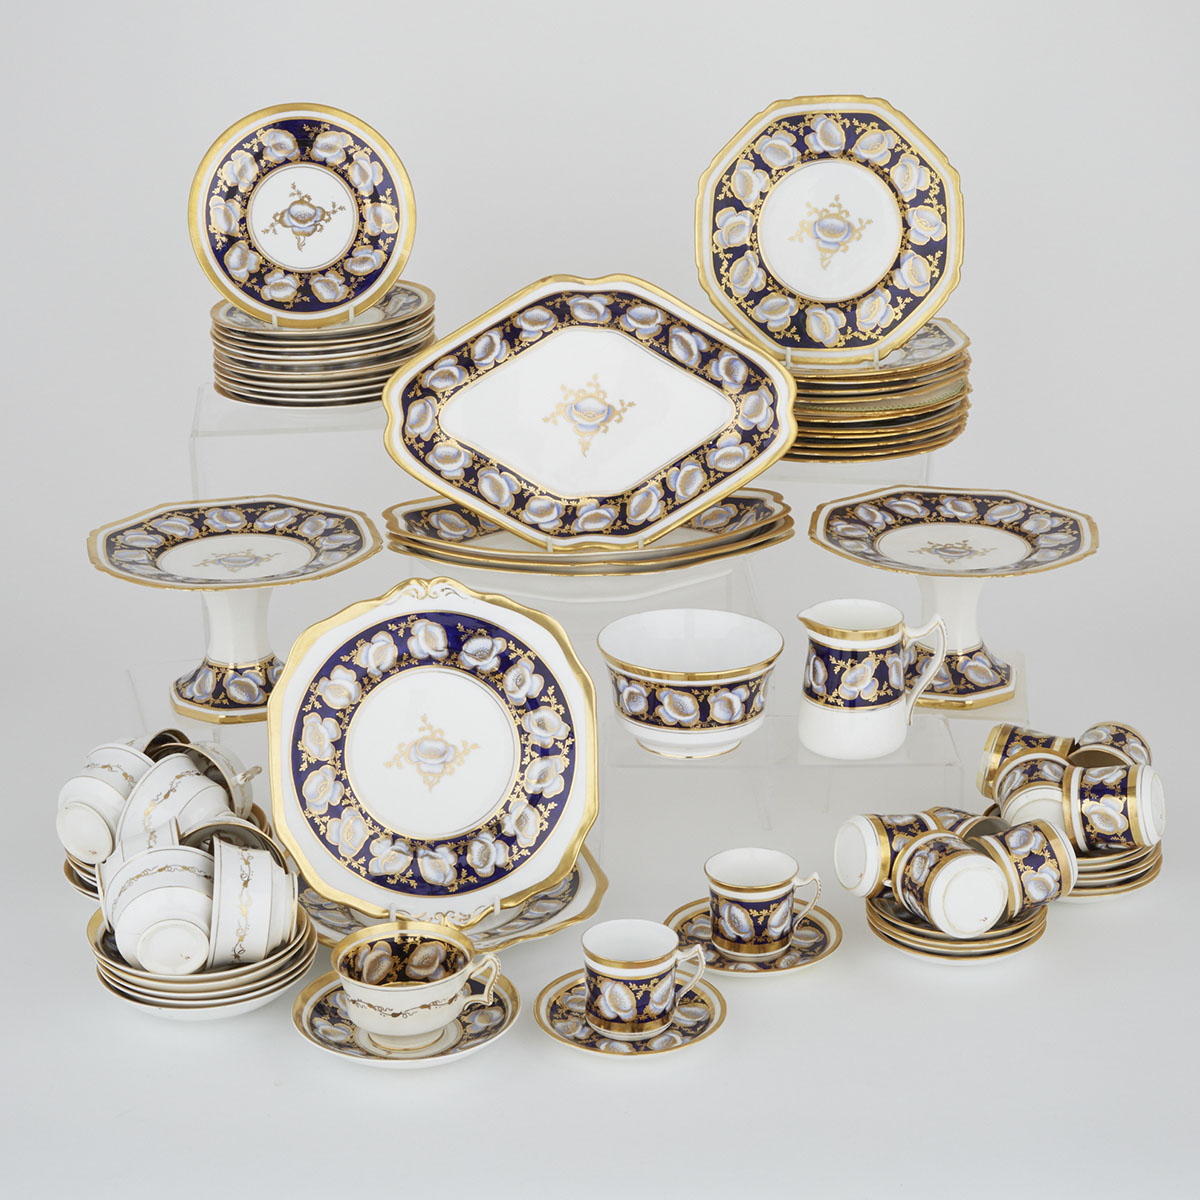 English Porcelain Blue and Gilt Banded Service, early 19th century